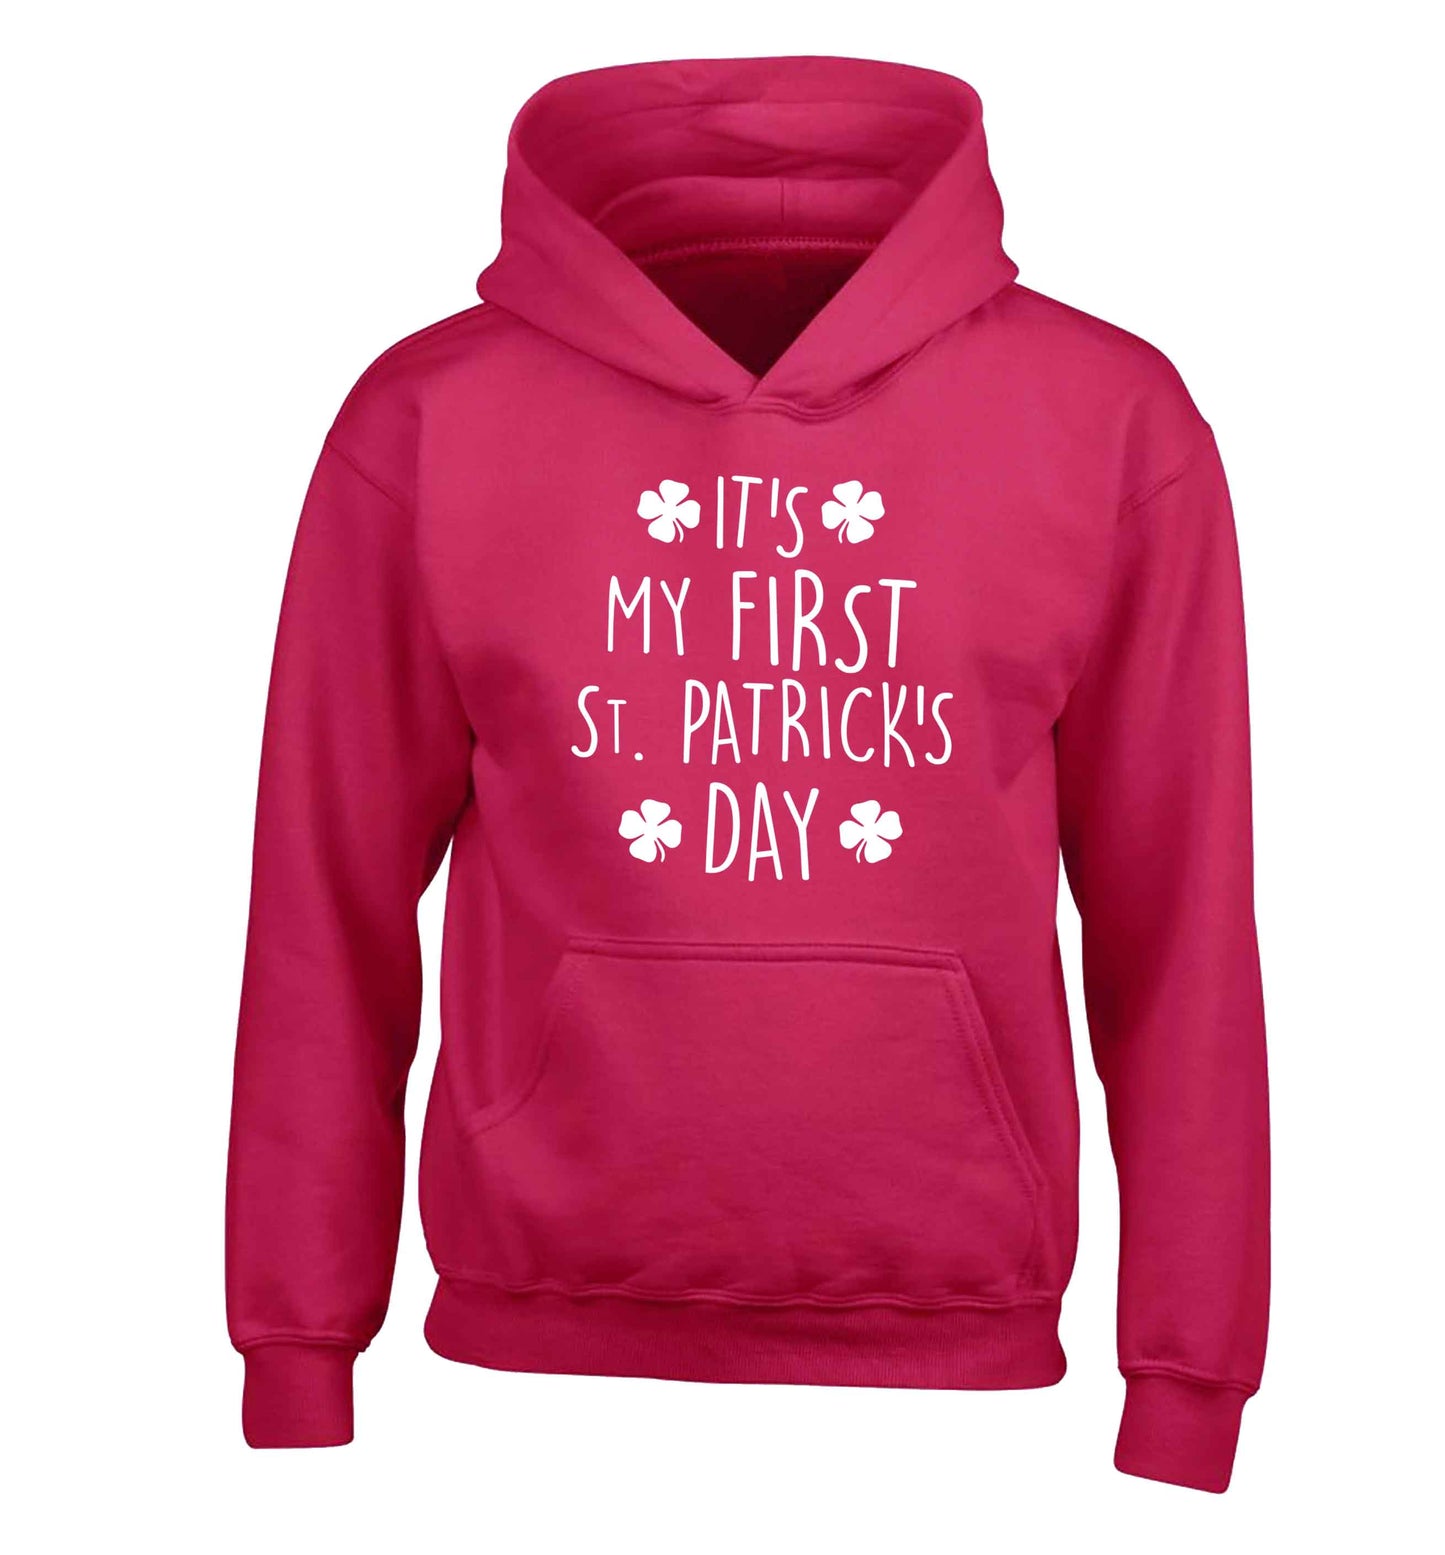 It's my first St.Patrick's day children's pink hoodie 12-13 Years